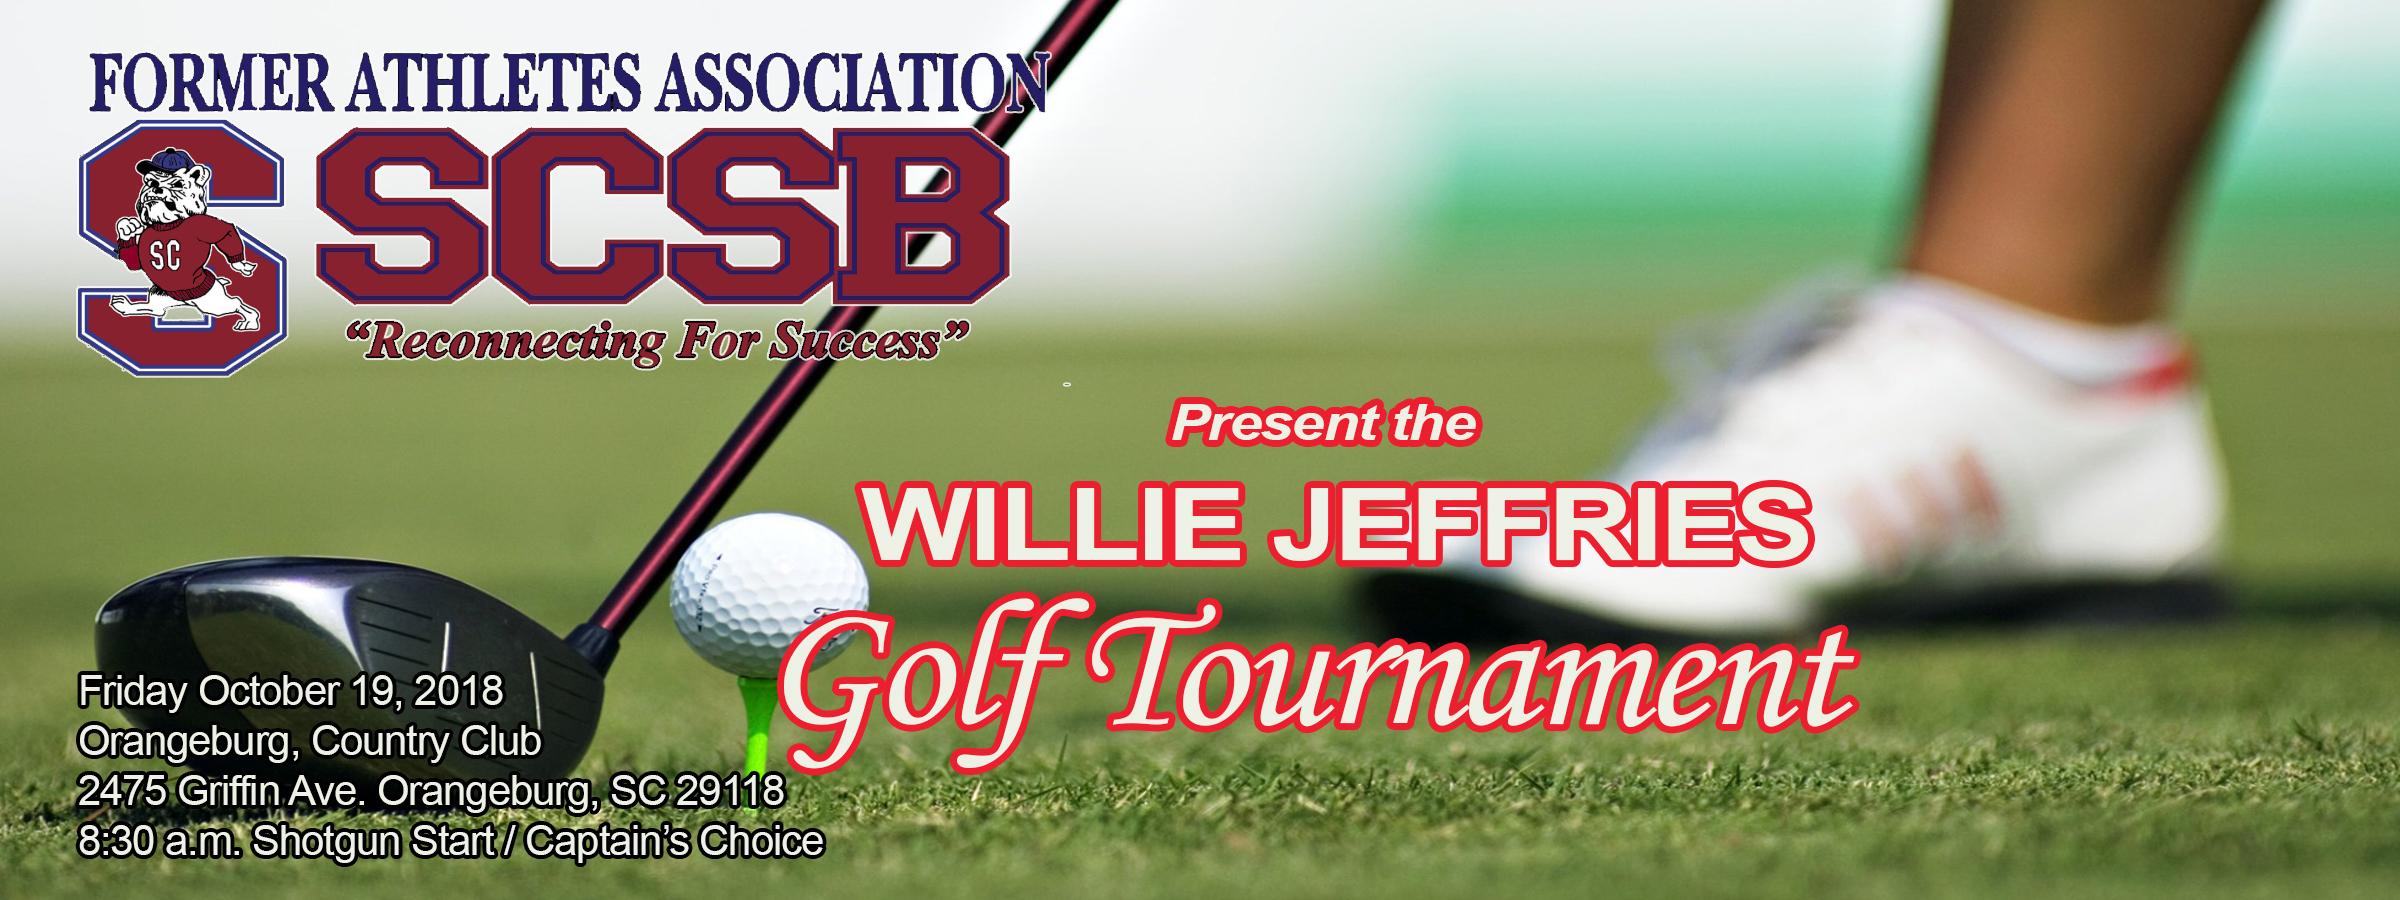 SCSB Former Athletes Present The Willie Jeffries Golf Tournament